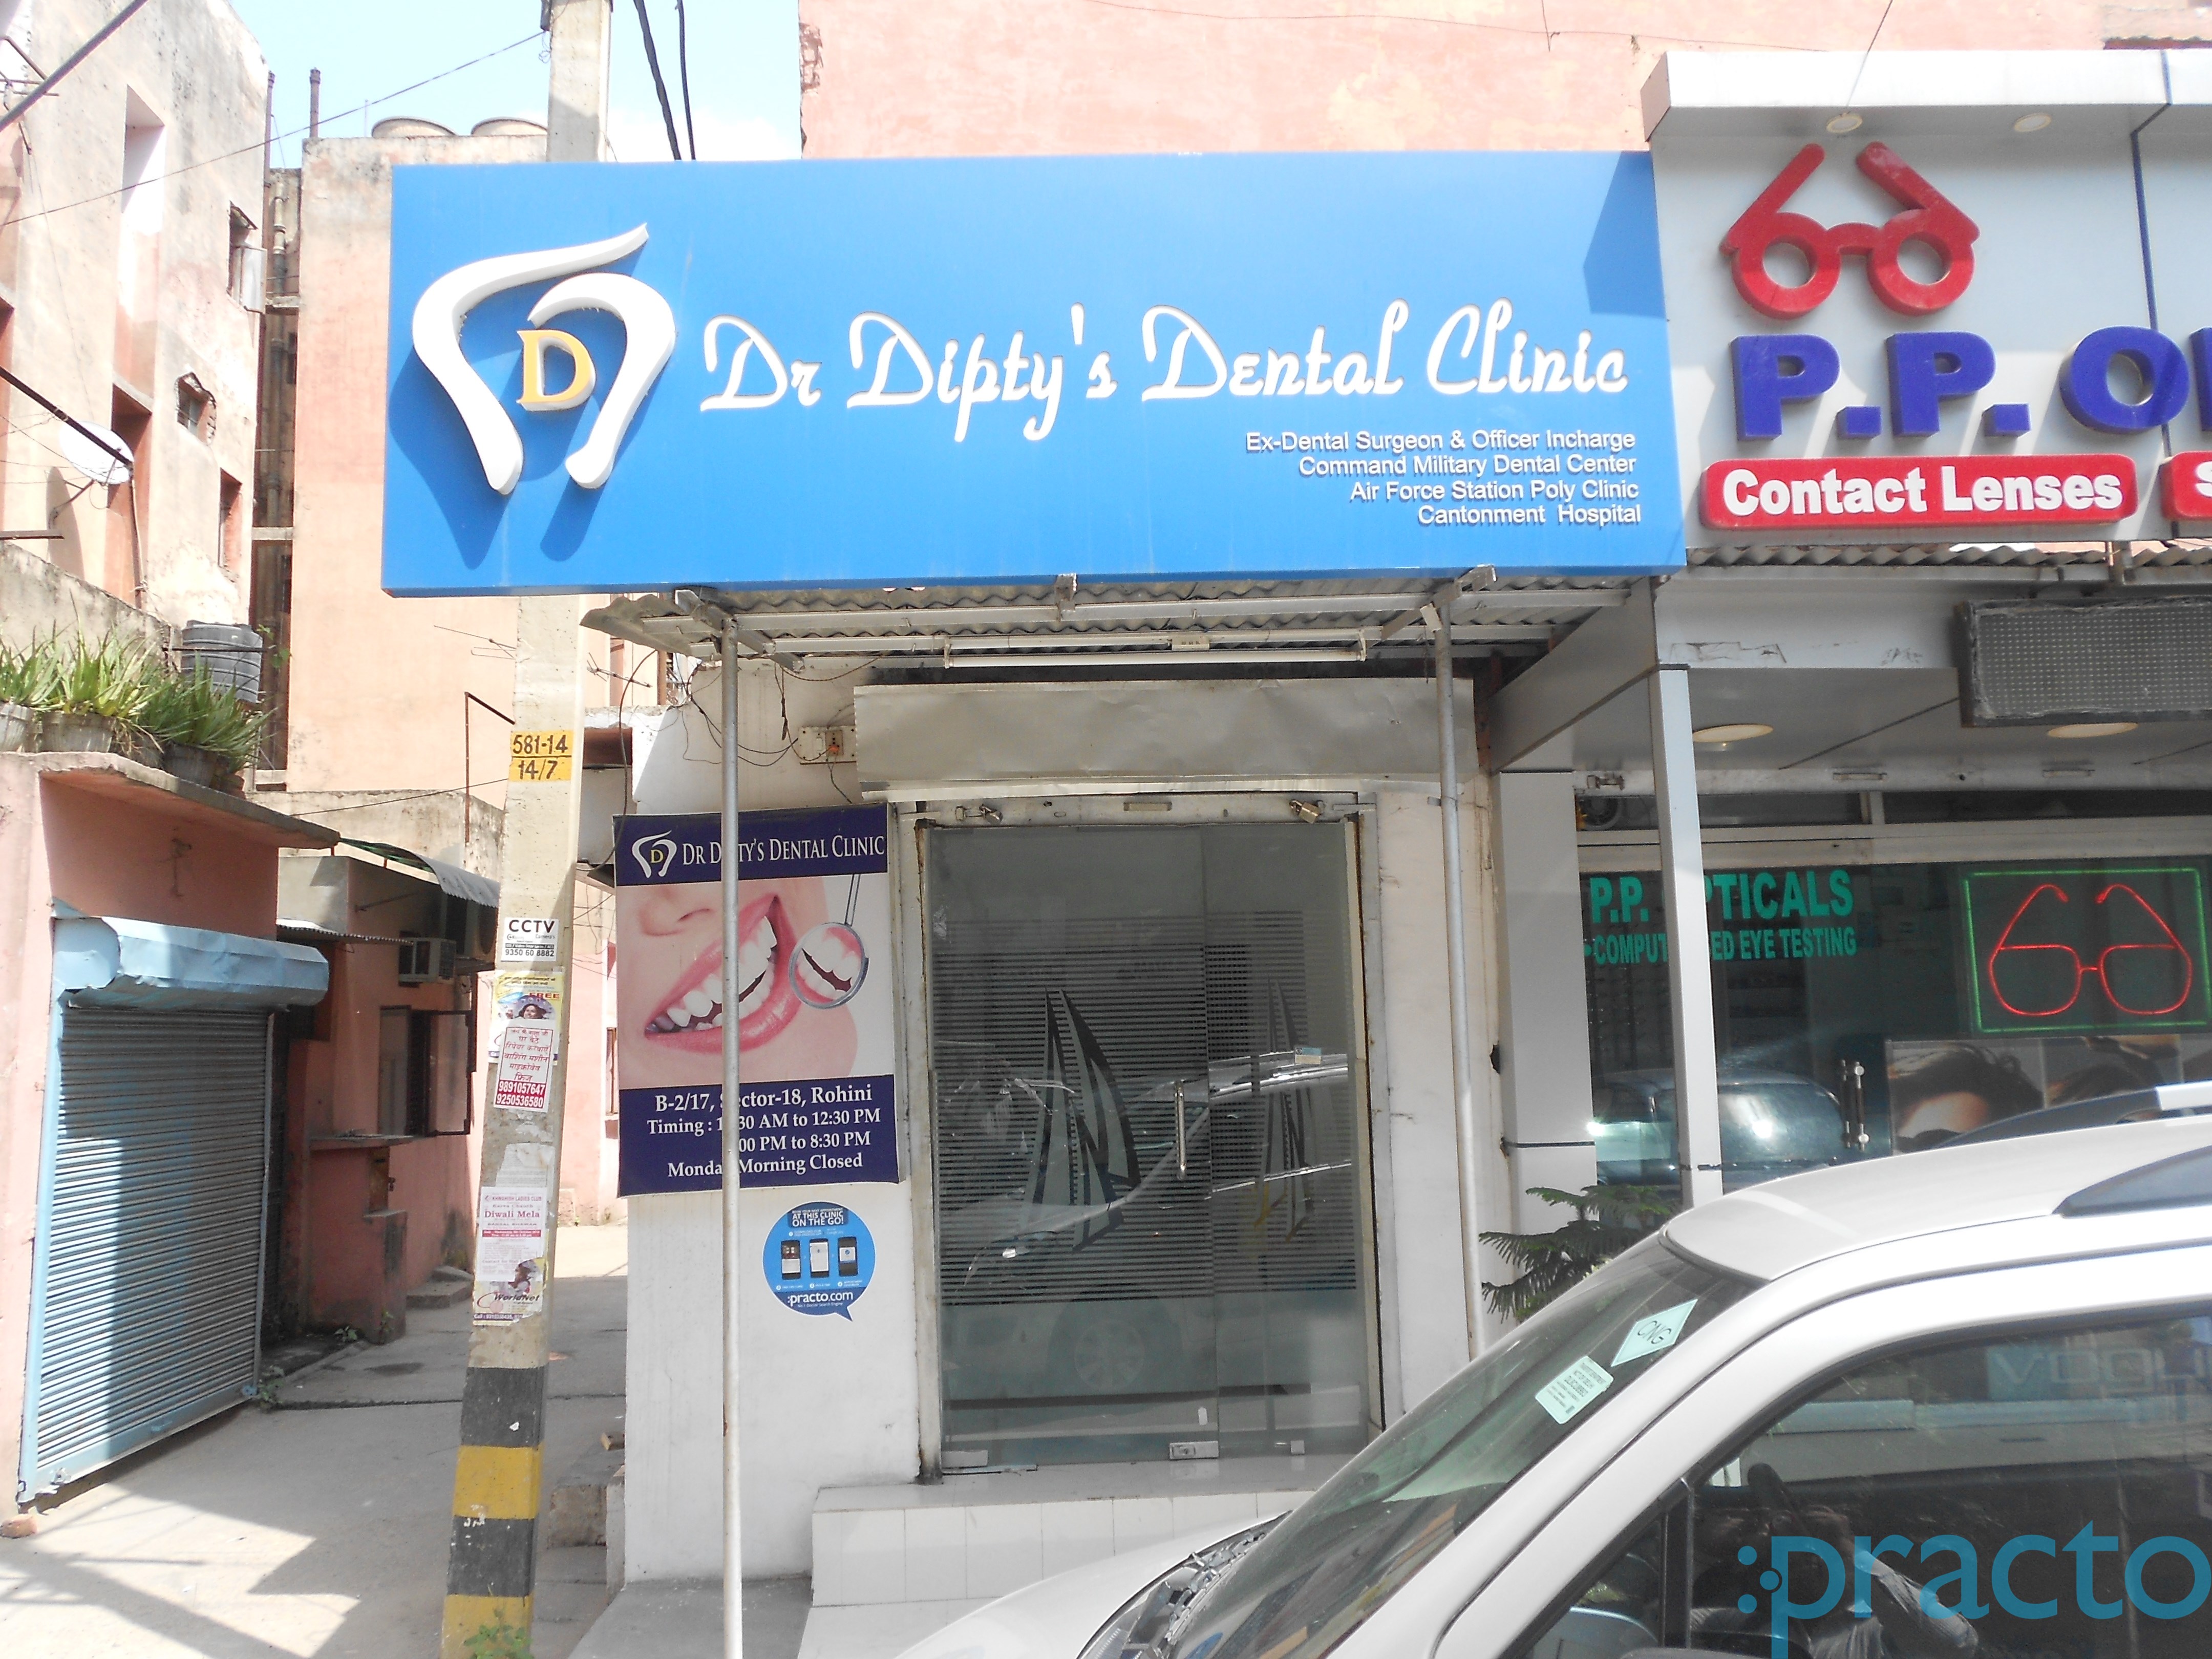 Dr Diptys Dental Clinic Medical Services | Dentists